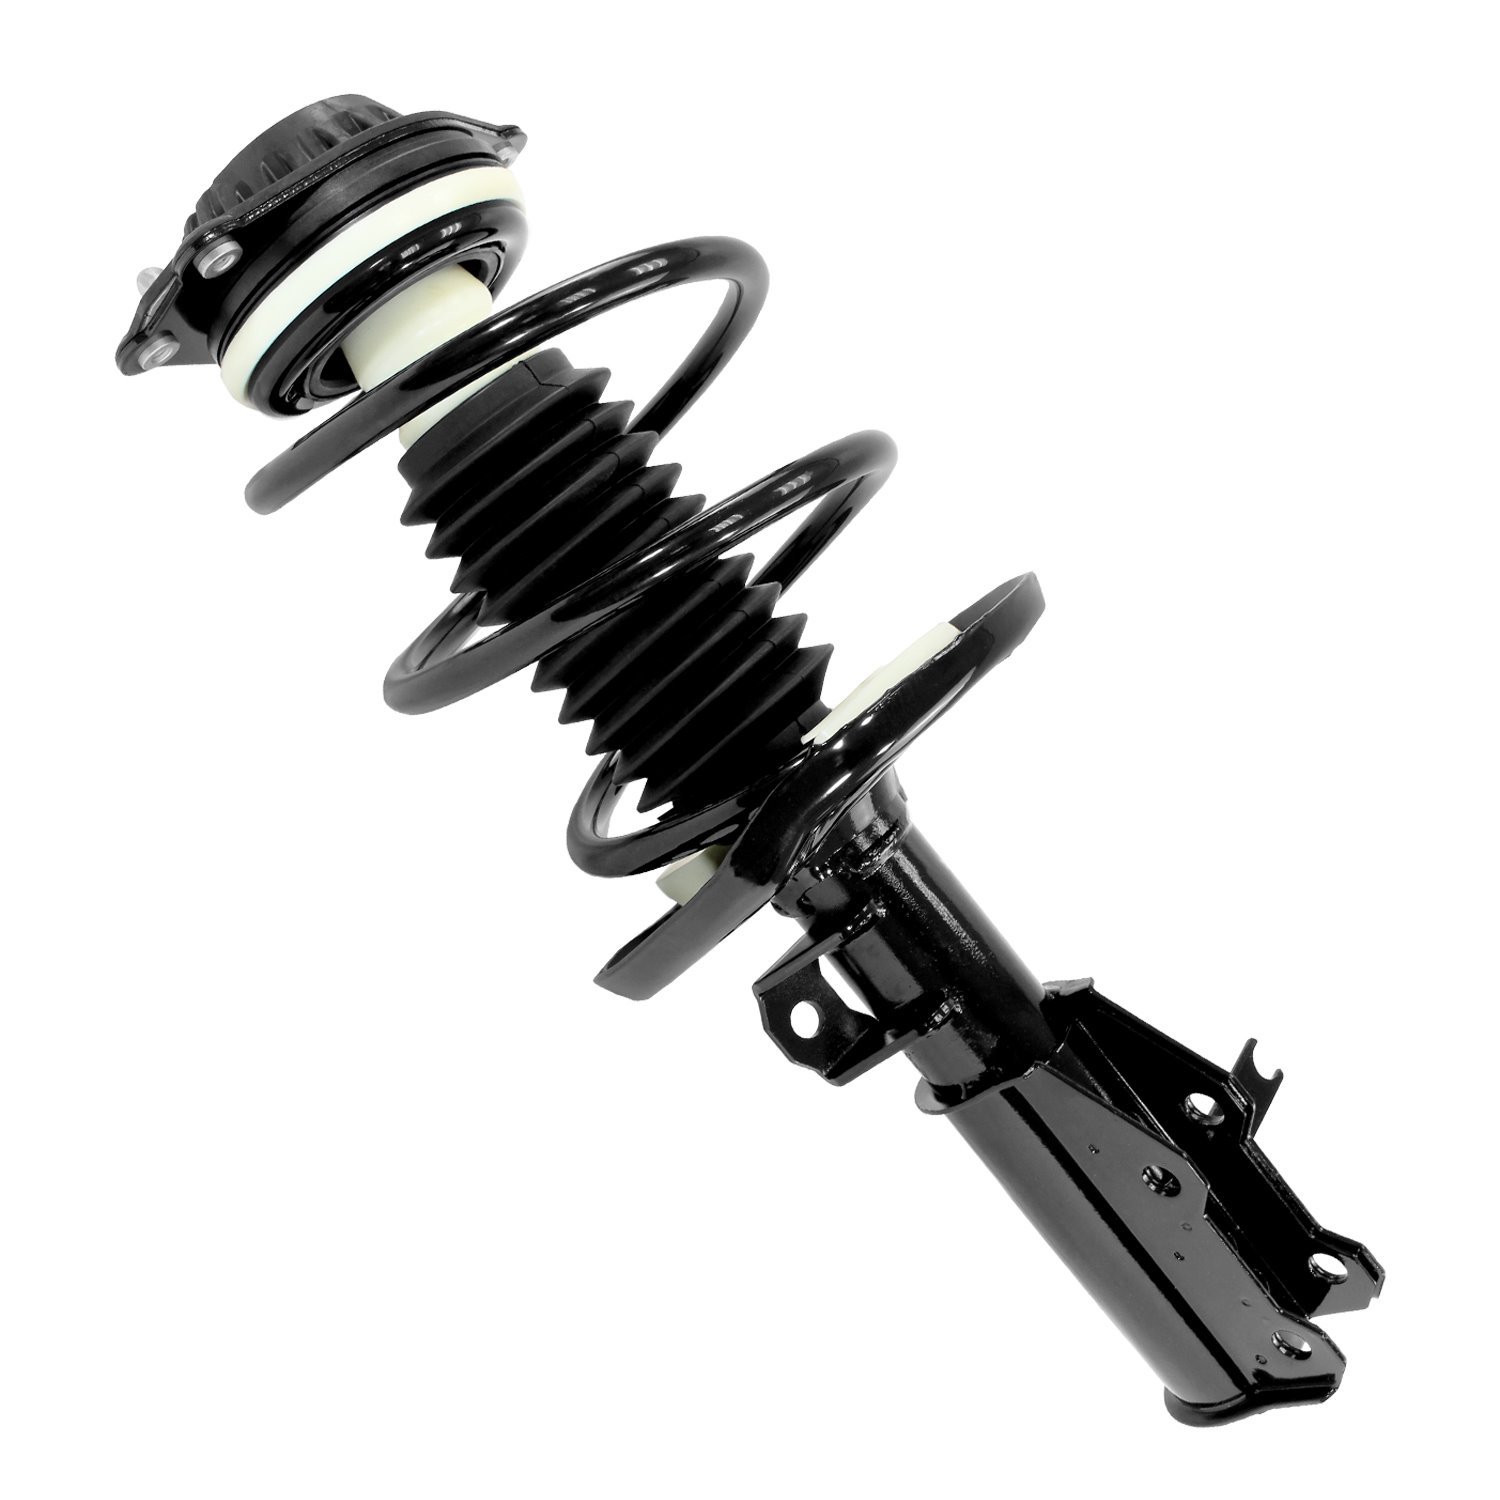 13511 Front Suspension Strut & Coil Spring Assemby Fits Select Chevy Malibu